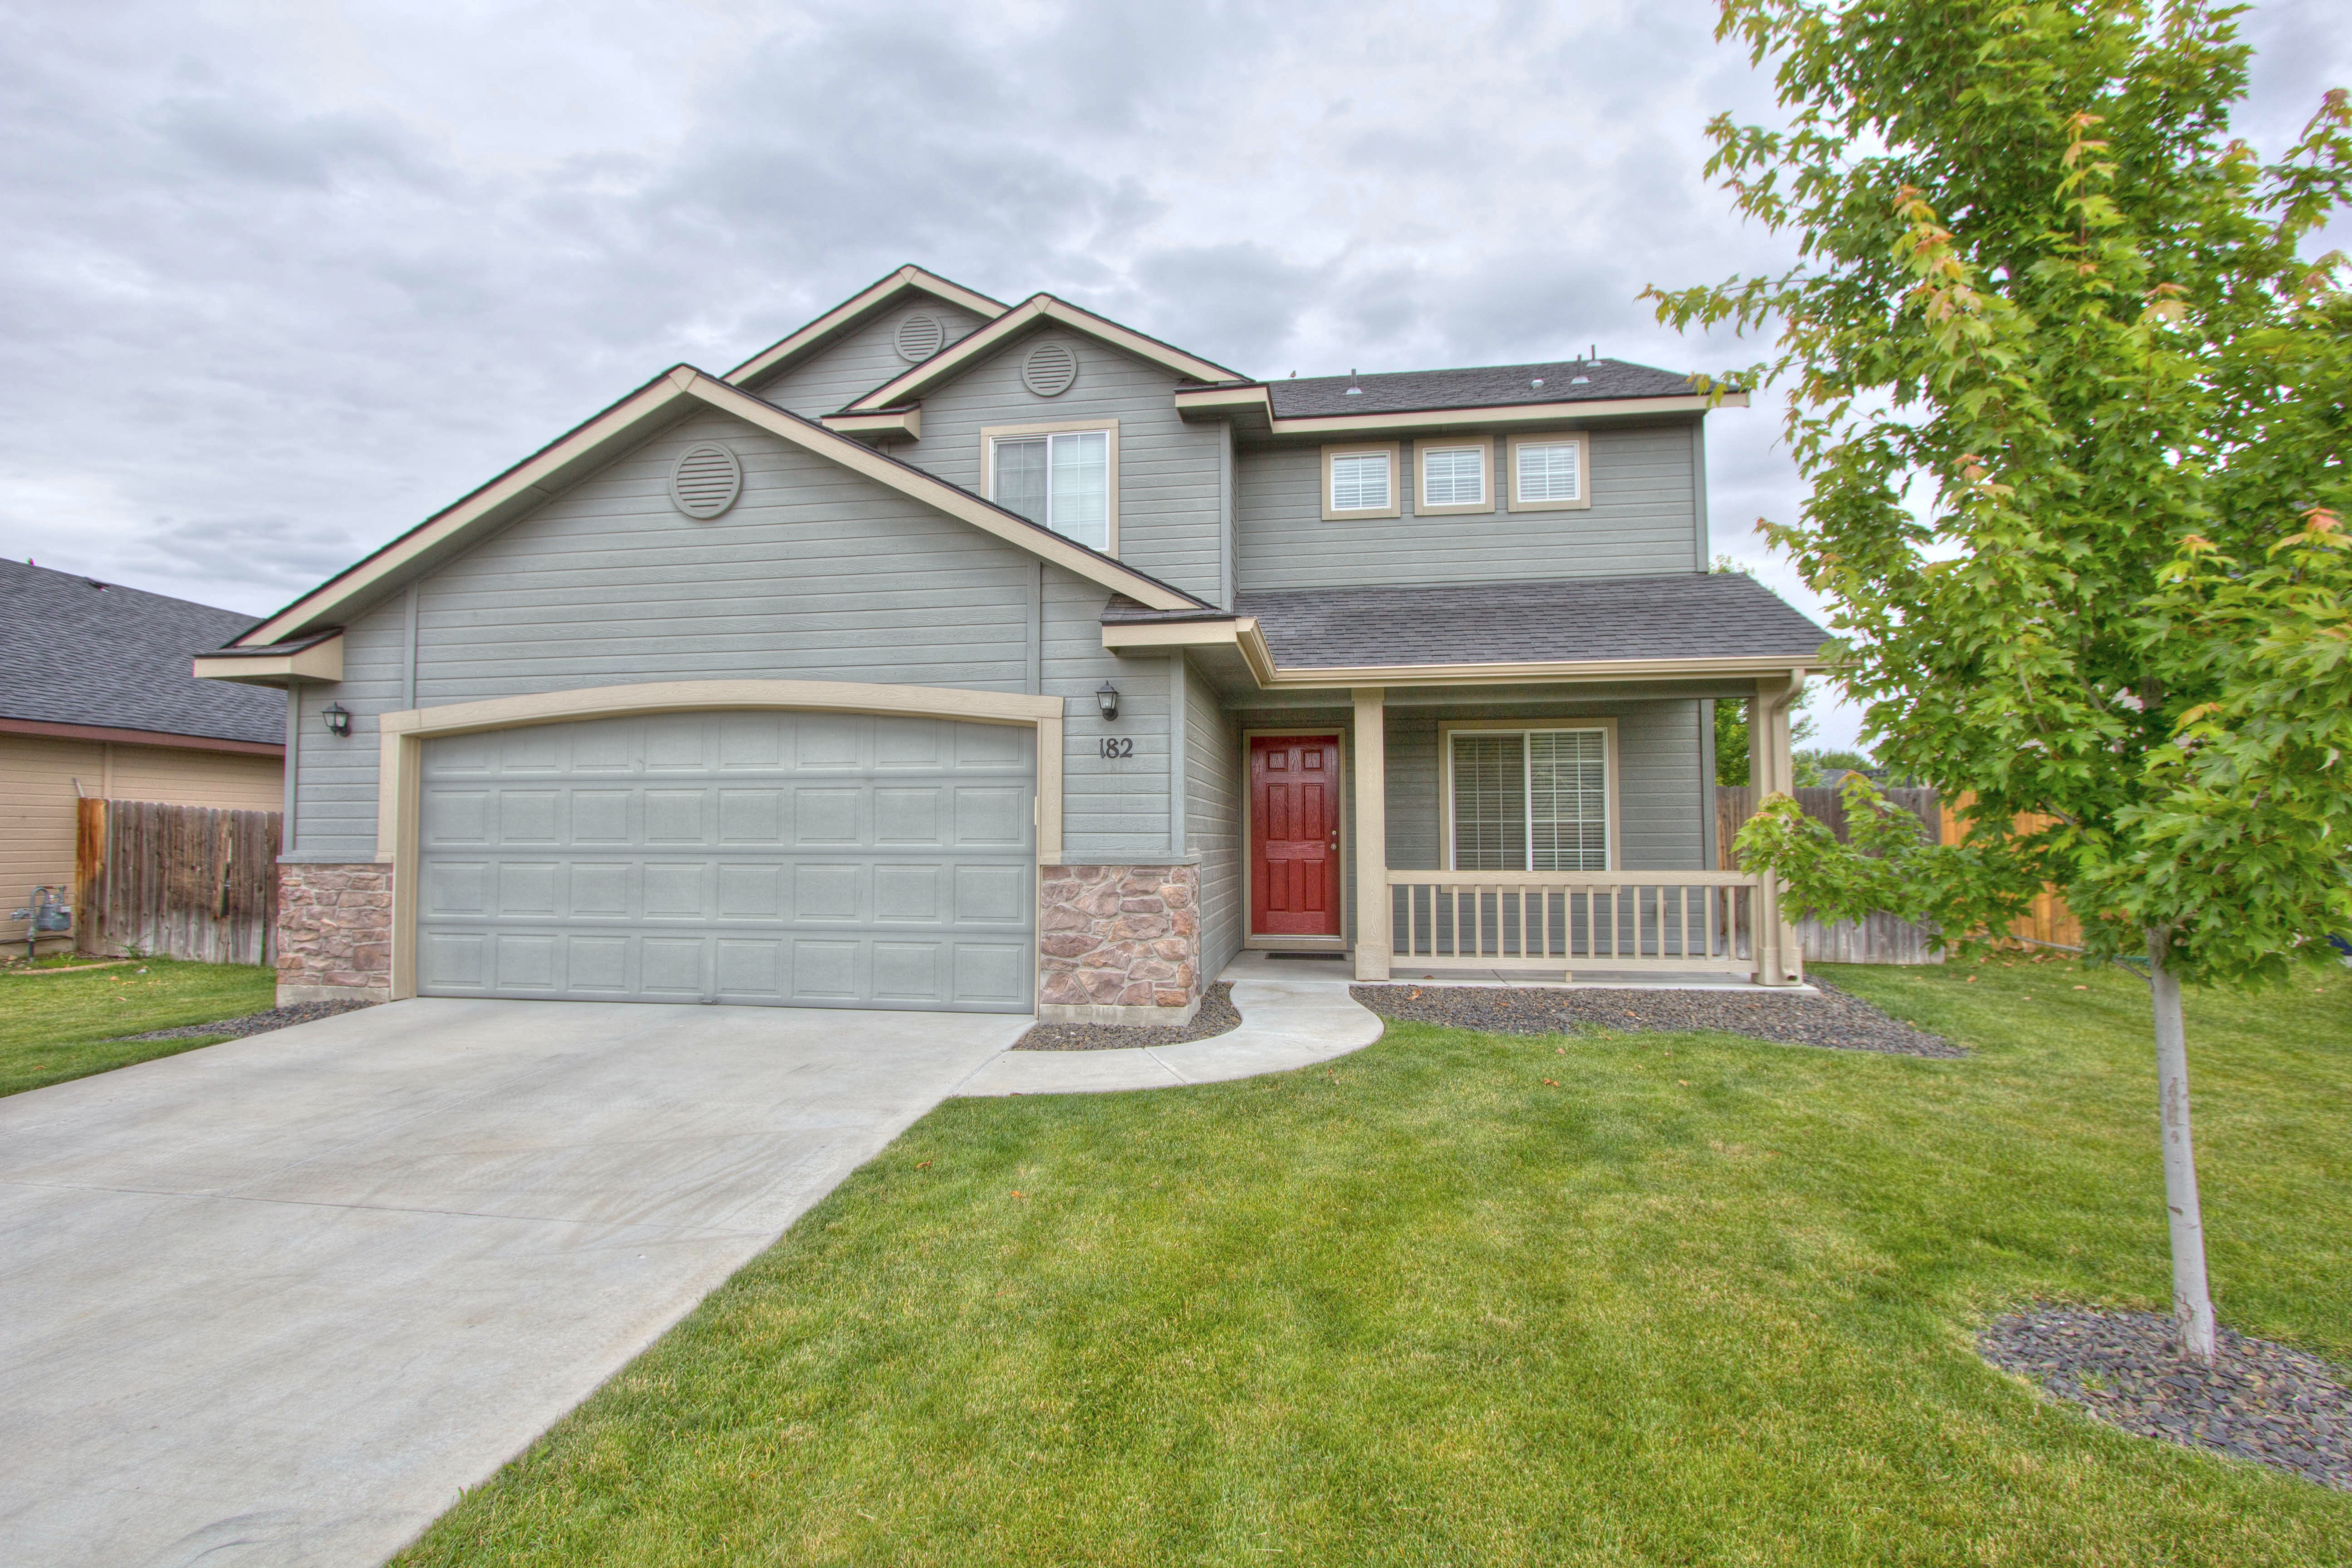 homes for sale in meridian idaho